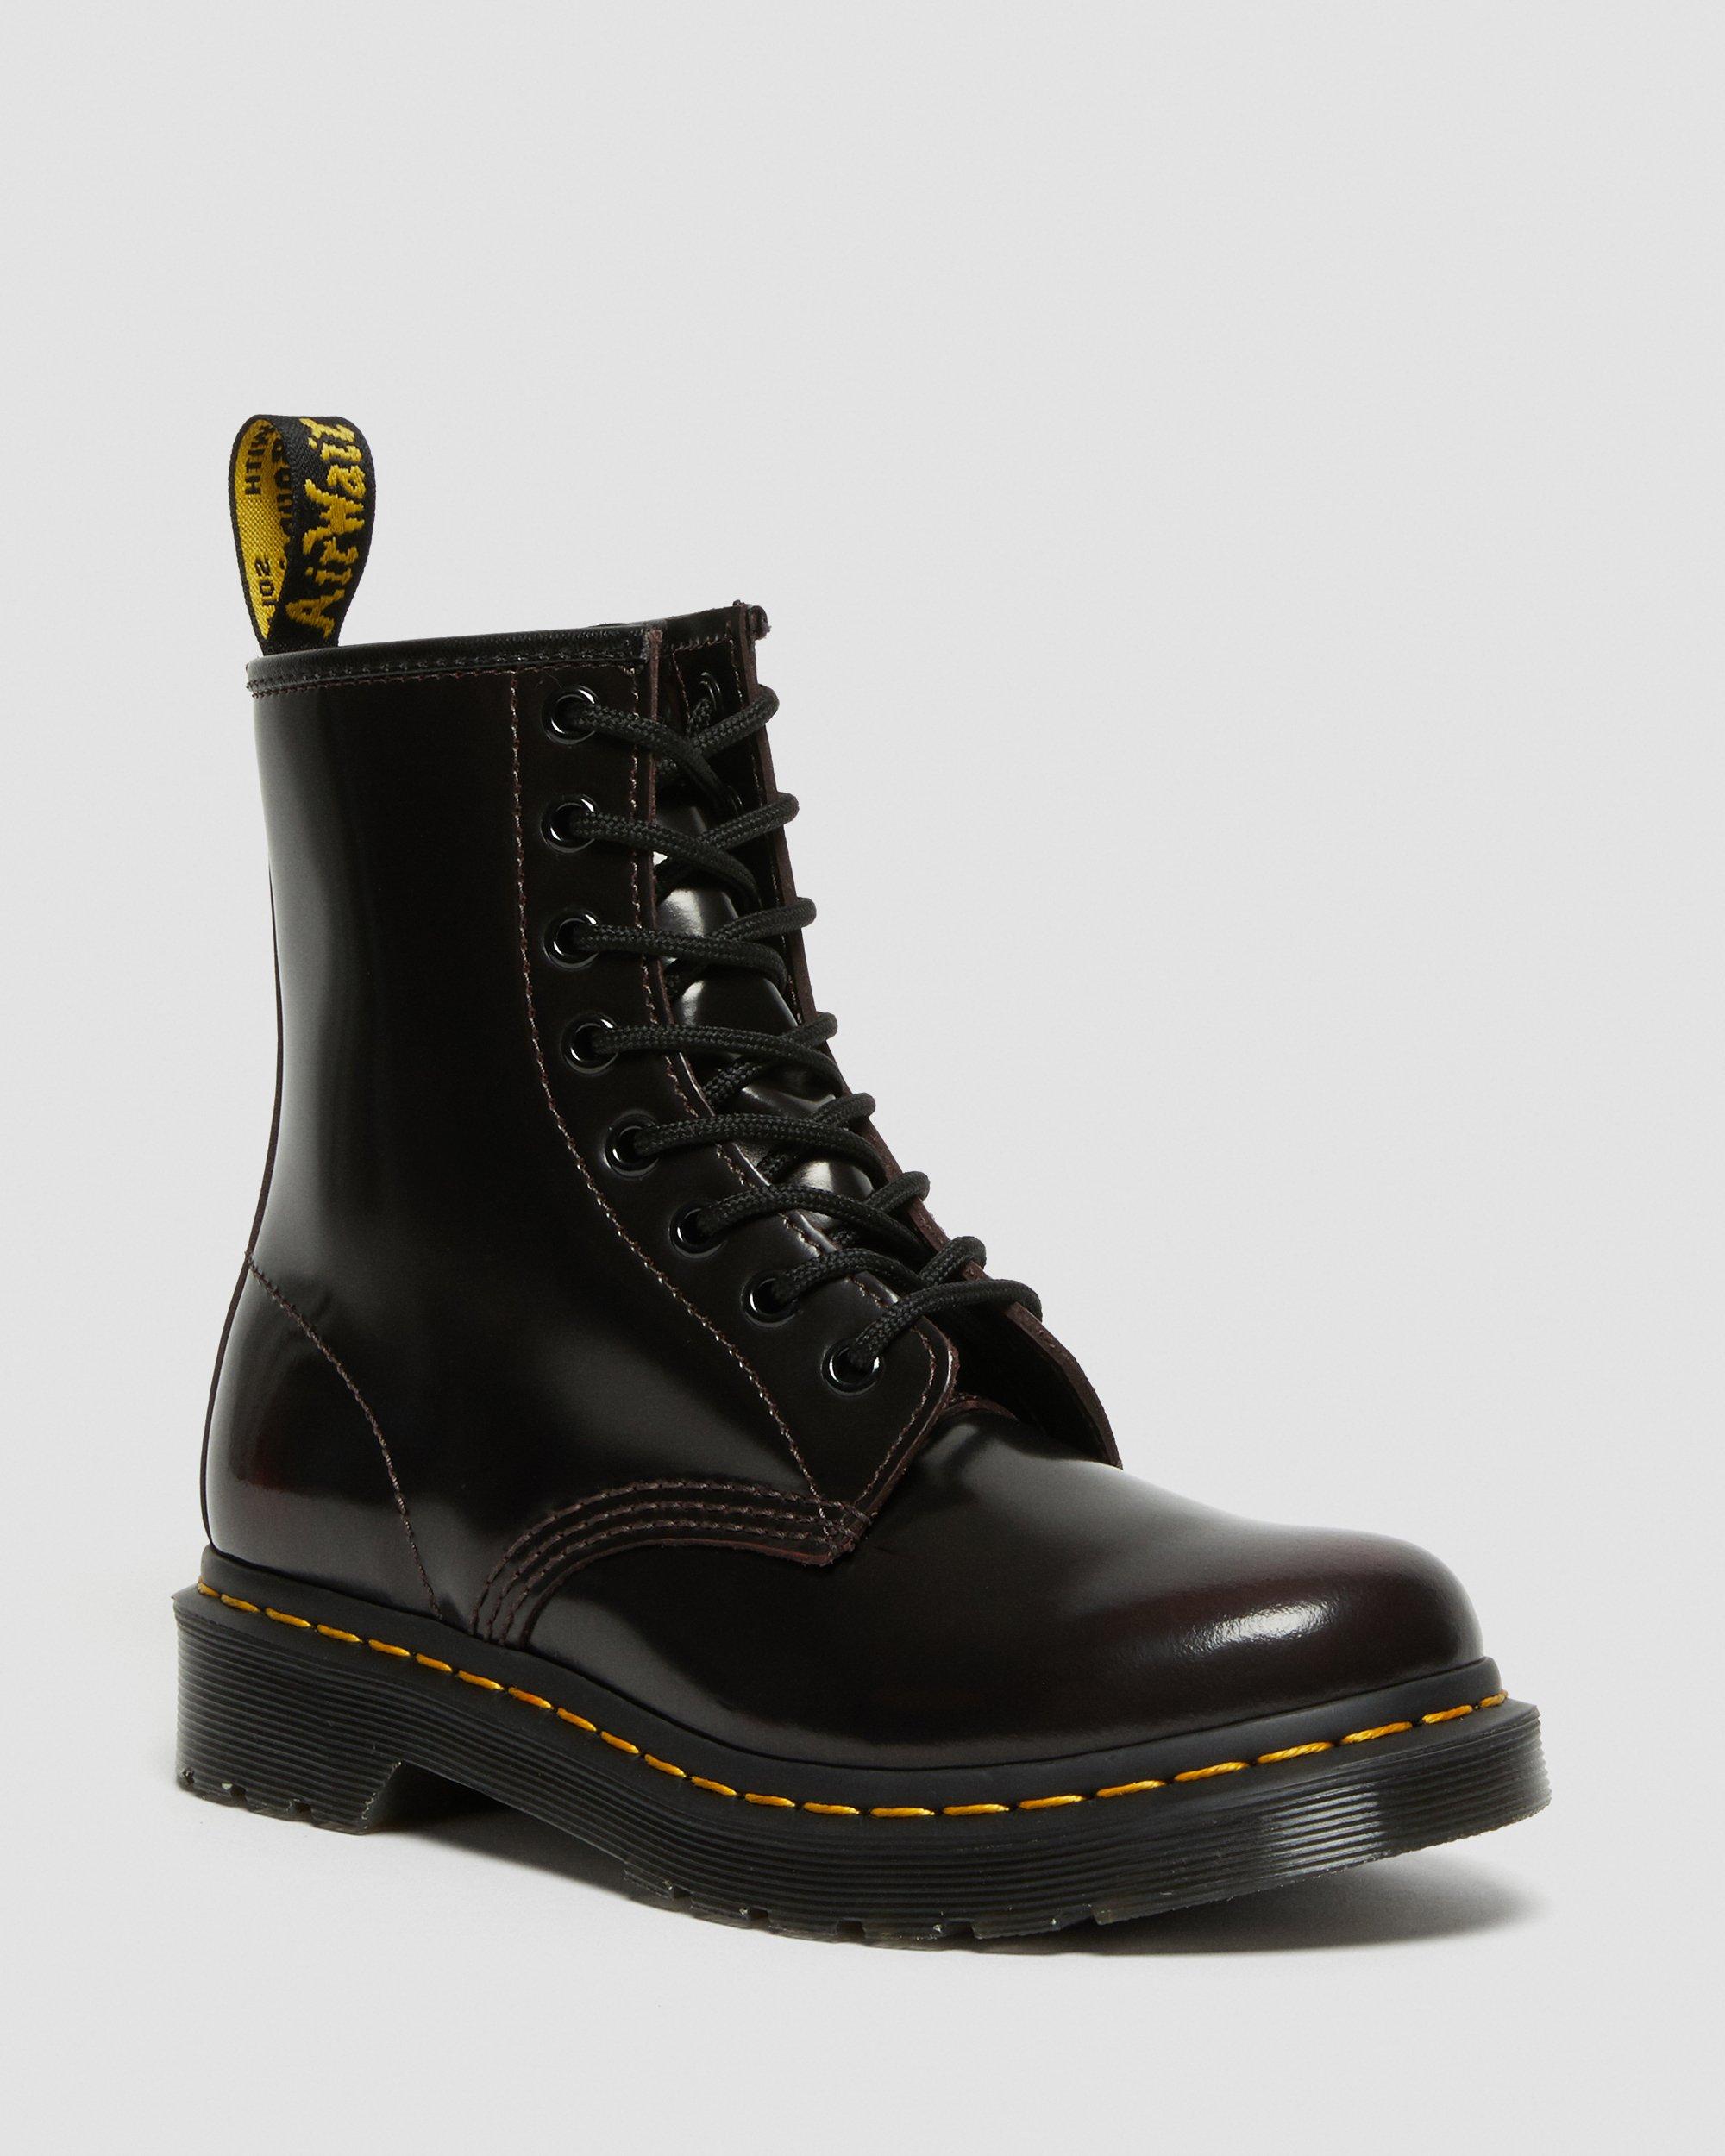 1460 Women's Arcadia Leather Lace Up Boots in Cherry Red | Dr. Martens